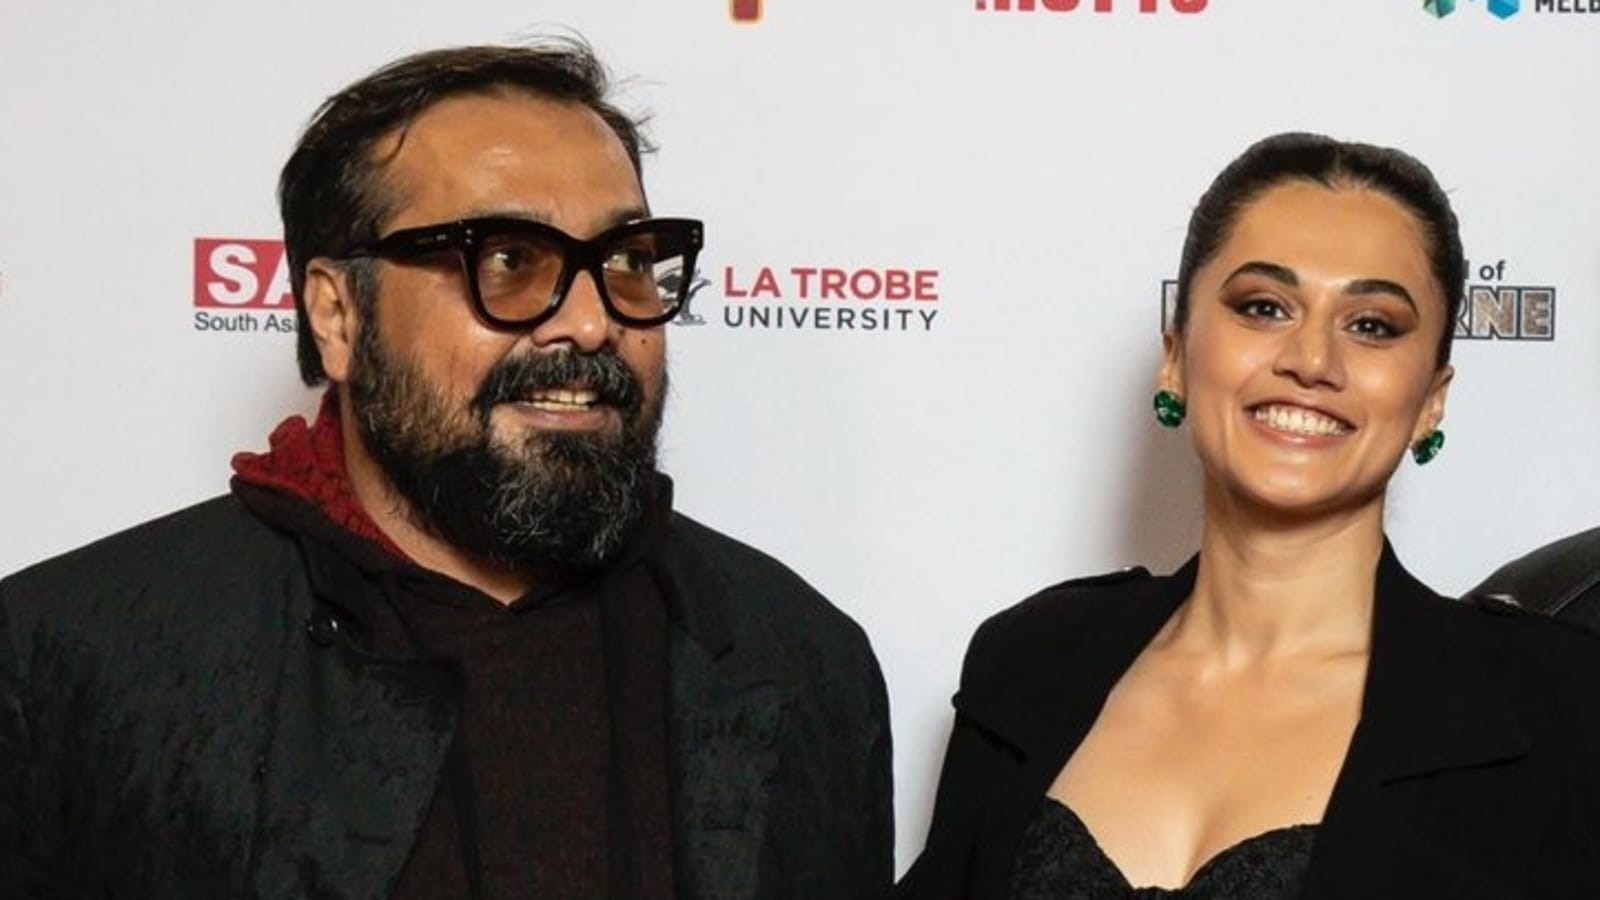 Pannu Tapsi Sex Vedio - Anurag Kashyap jokes about his body: 'I have bigger boobs than Taapsee Pannu'  | Bollywood - Hindustan Times